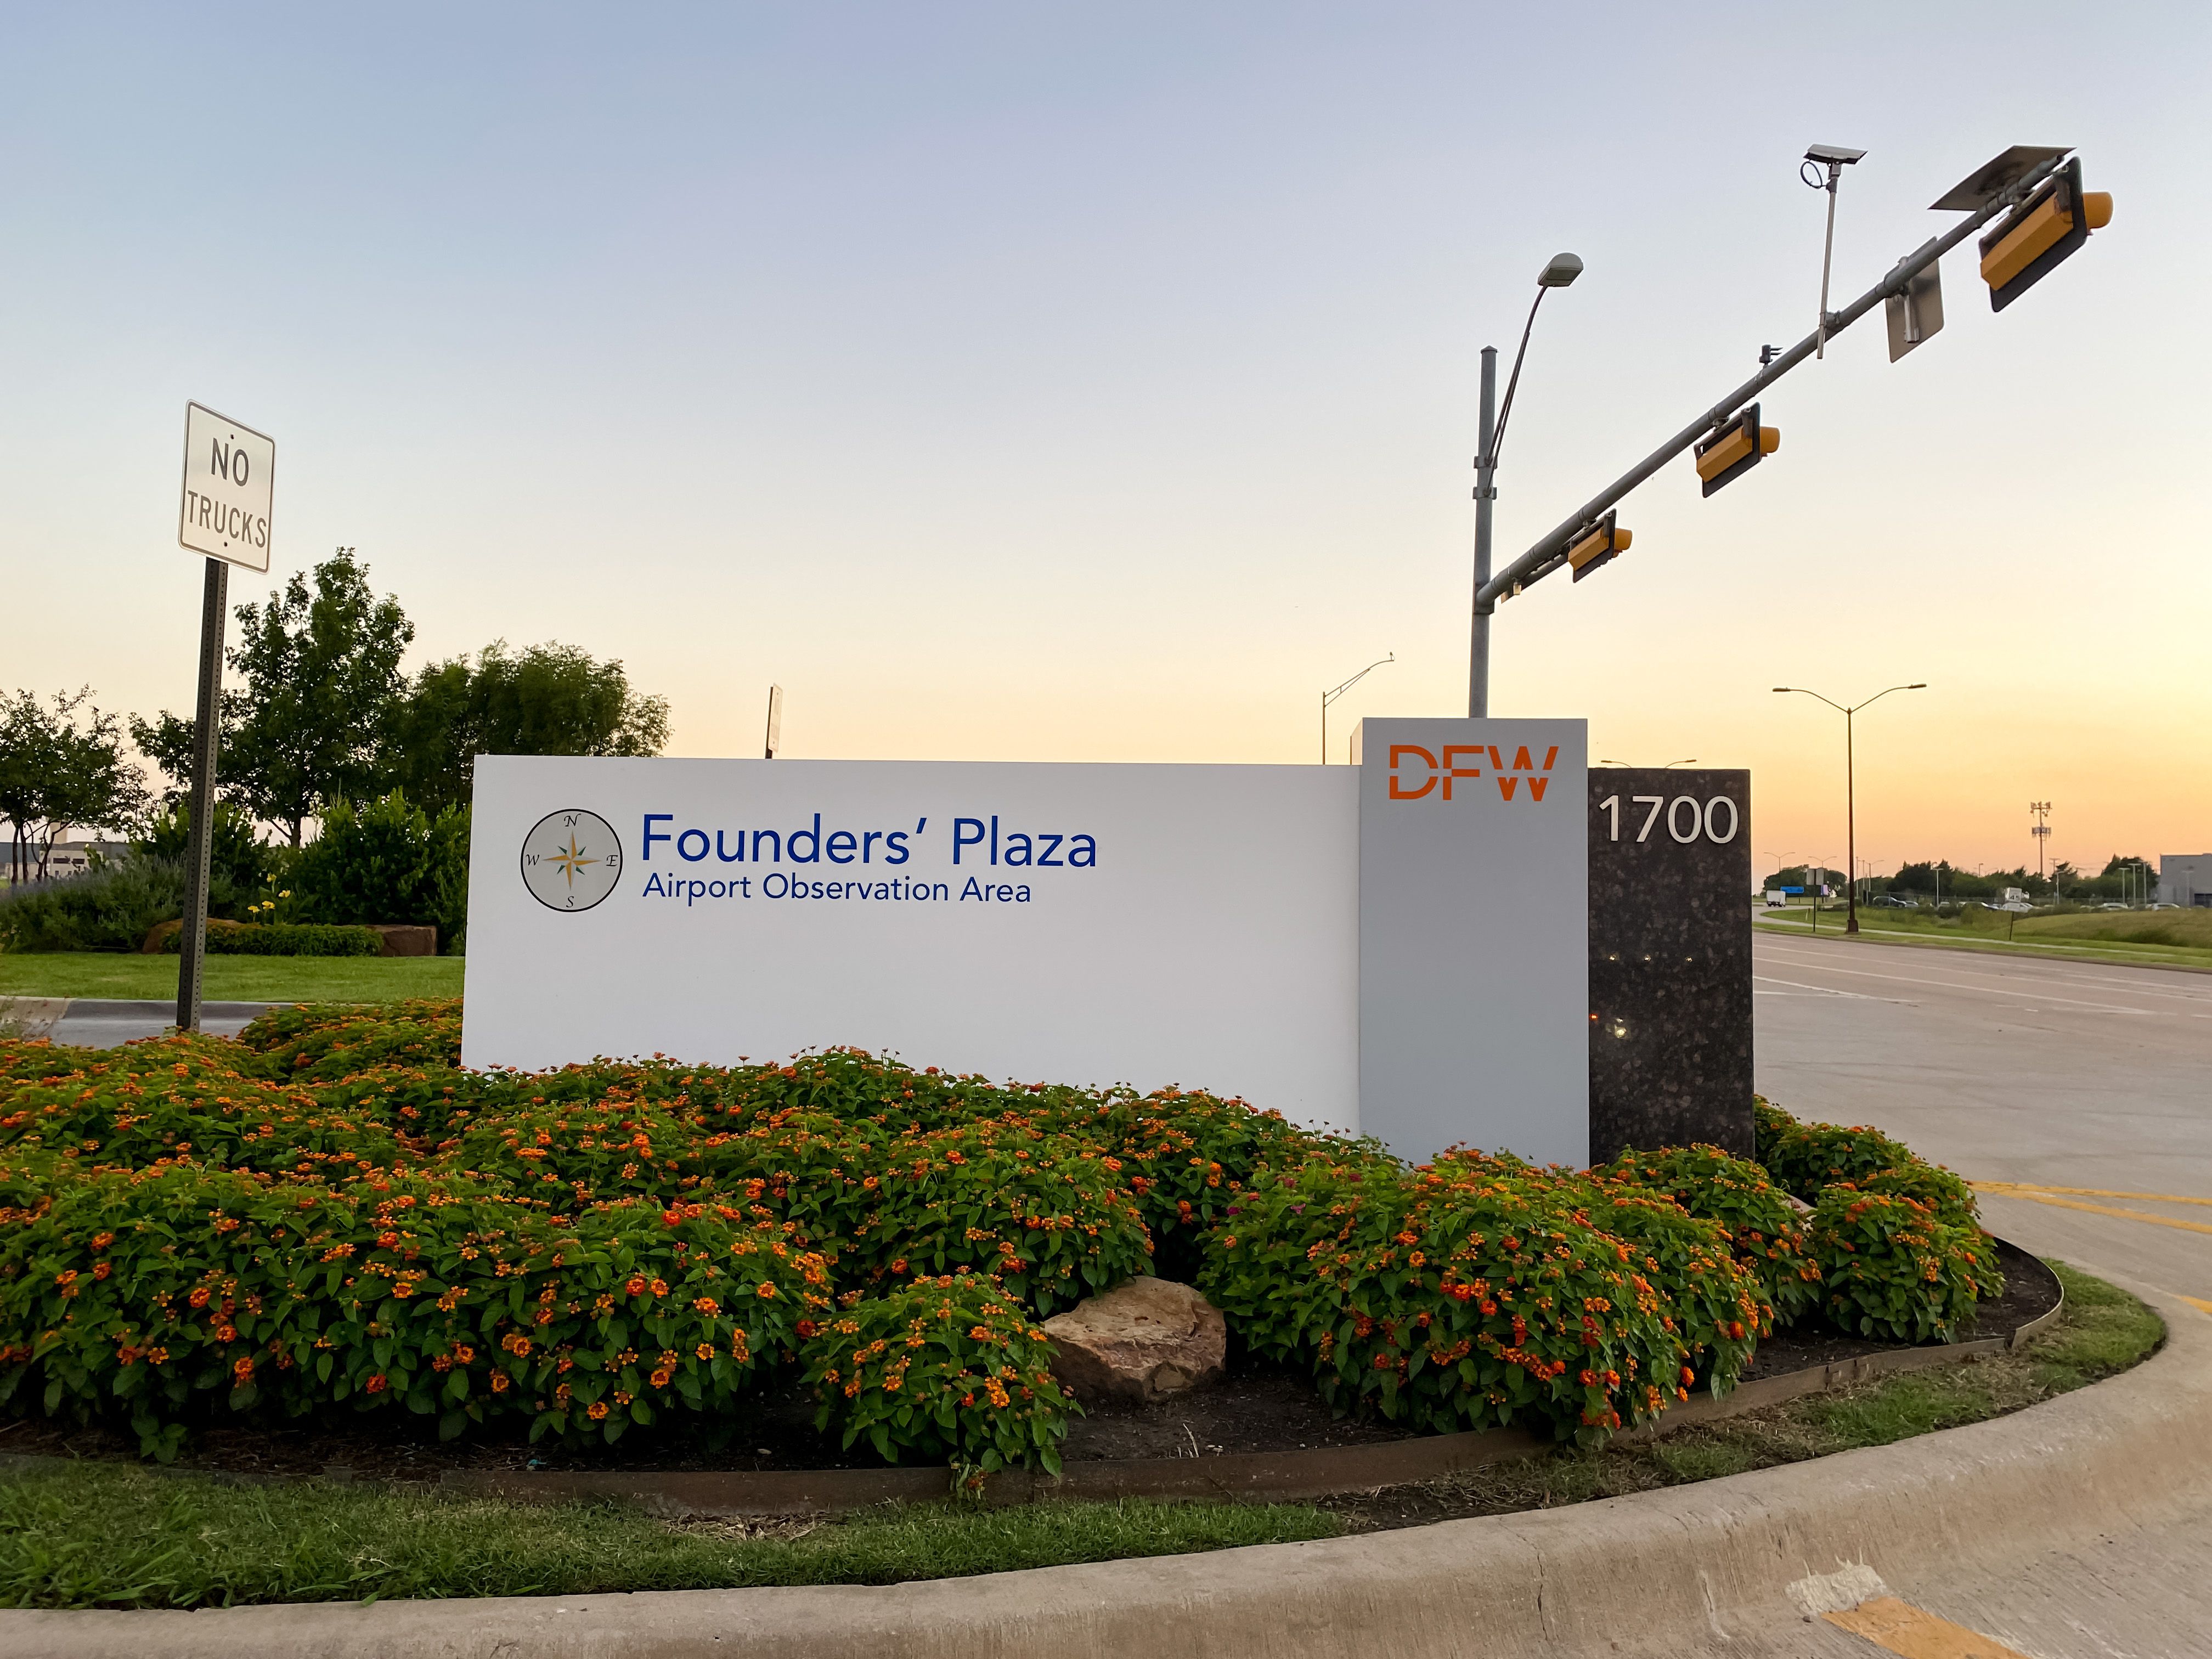 DFW Airport Founders Plaza